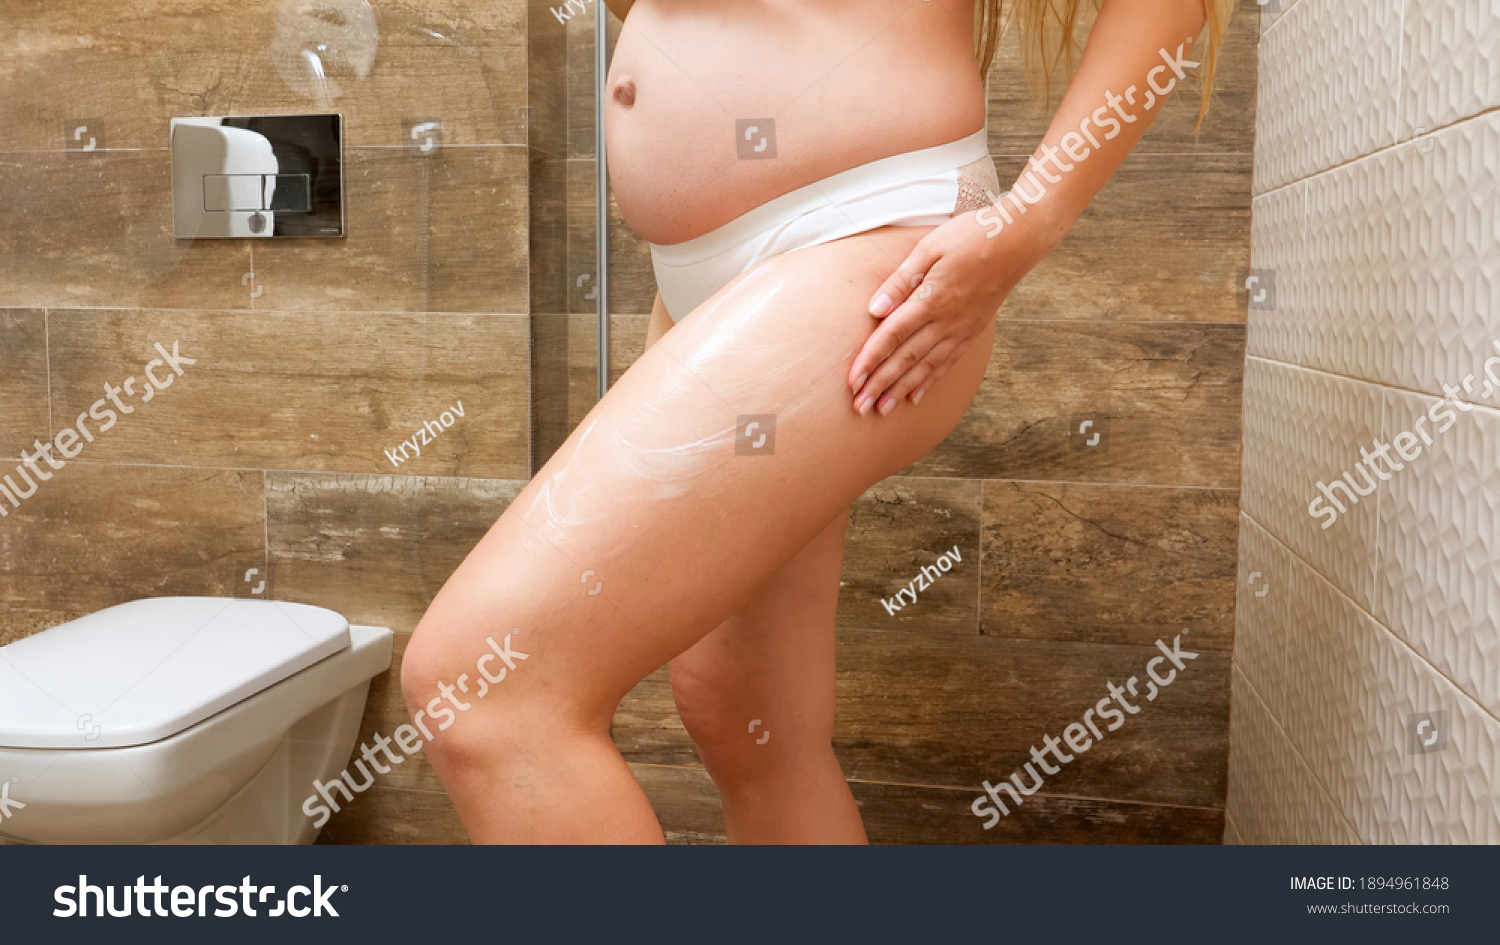 Toilet pissing woman stretching her butt cheeks over bowl